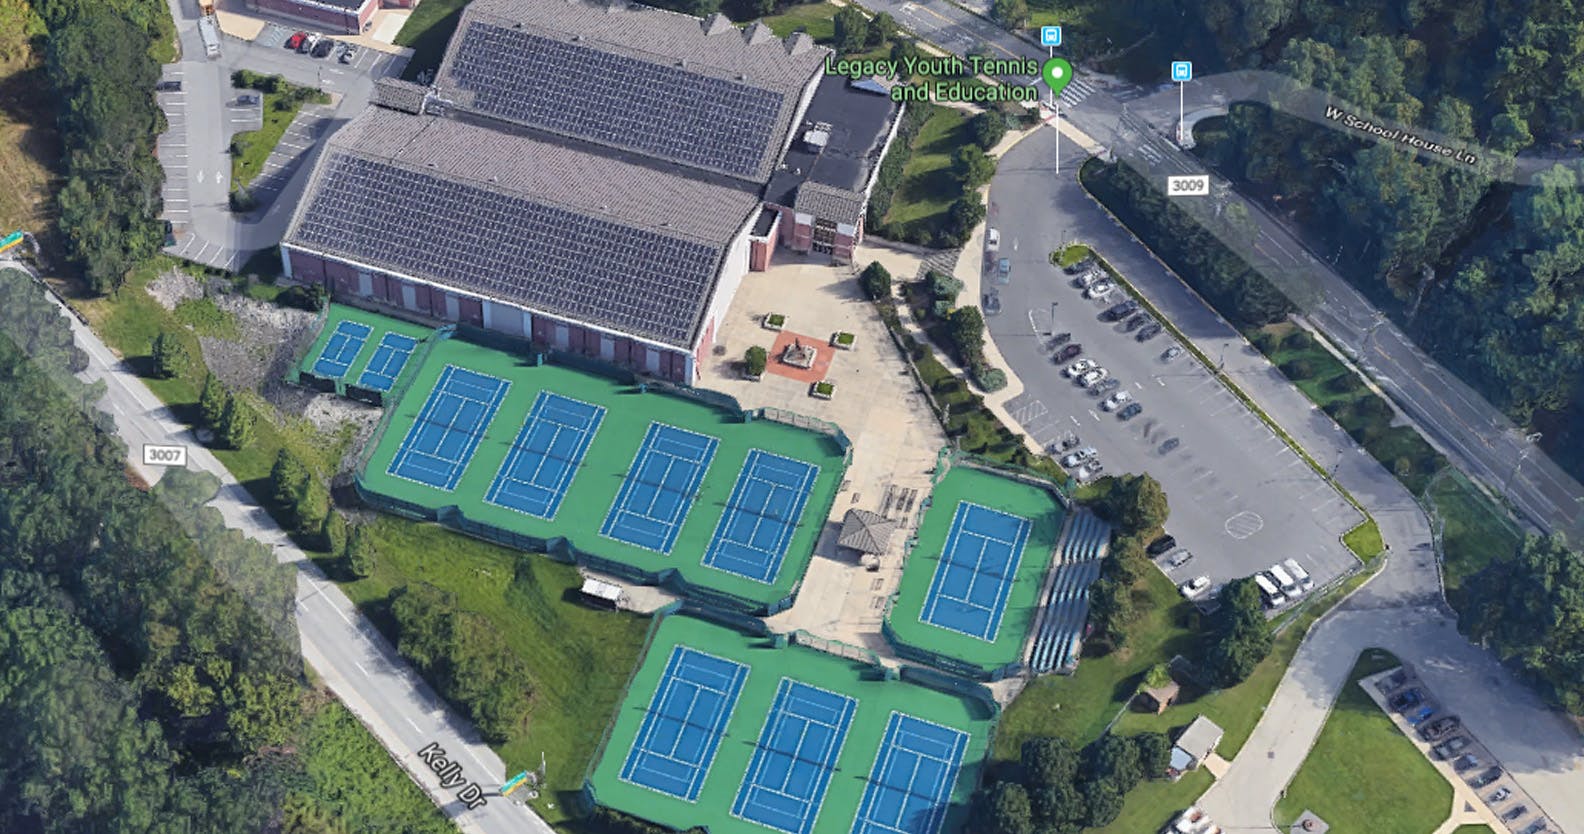 Image 1 of 2 of Legacy Youth Tennis & Education court